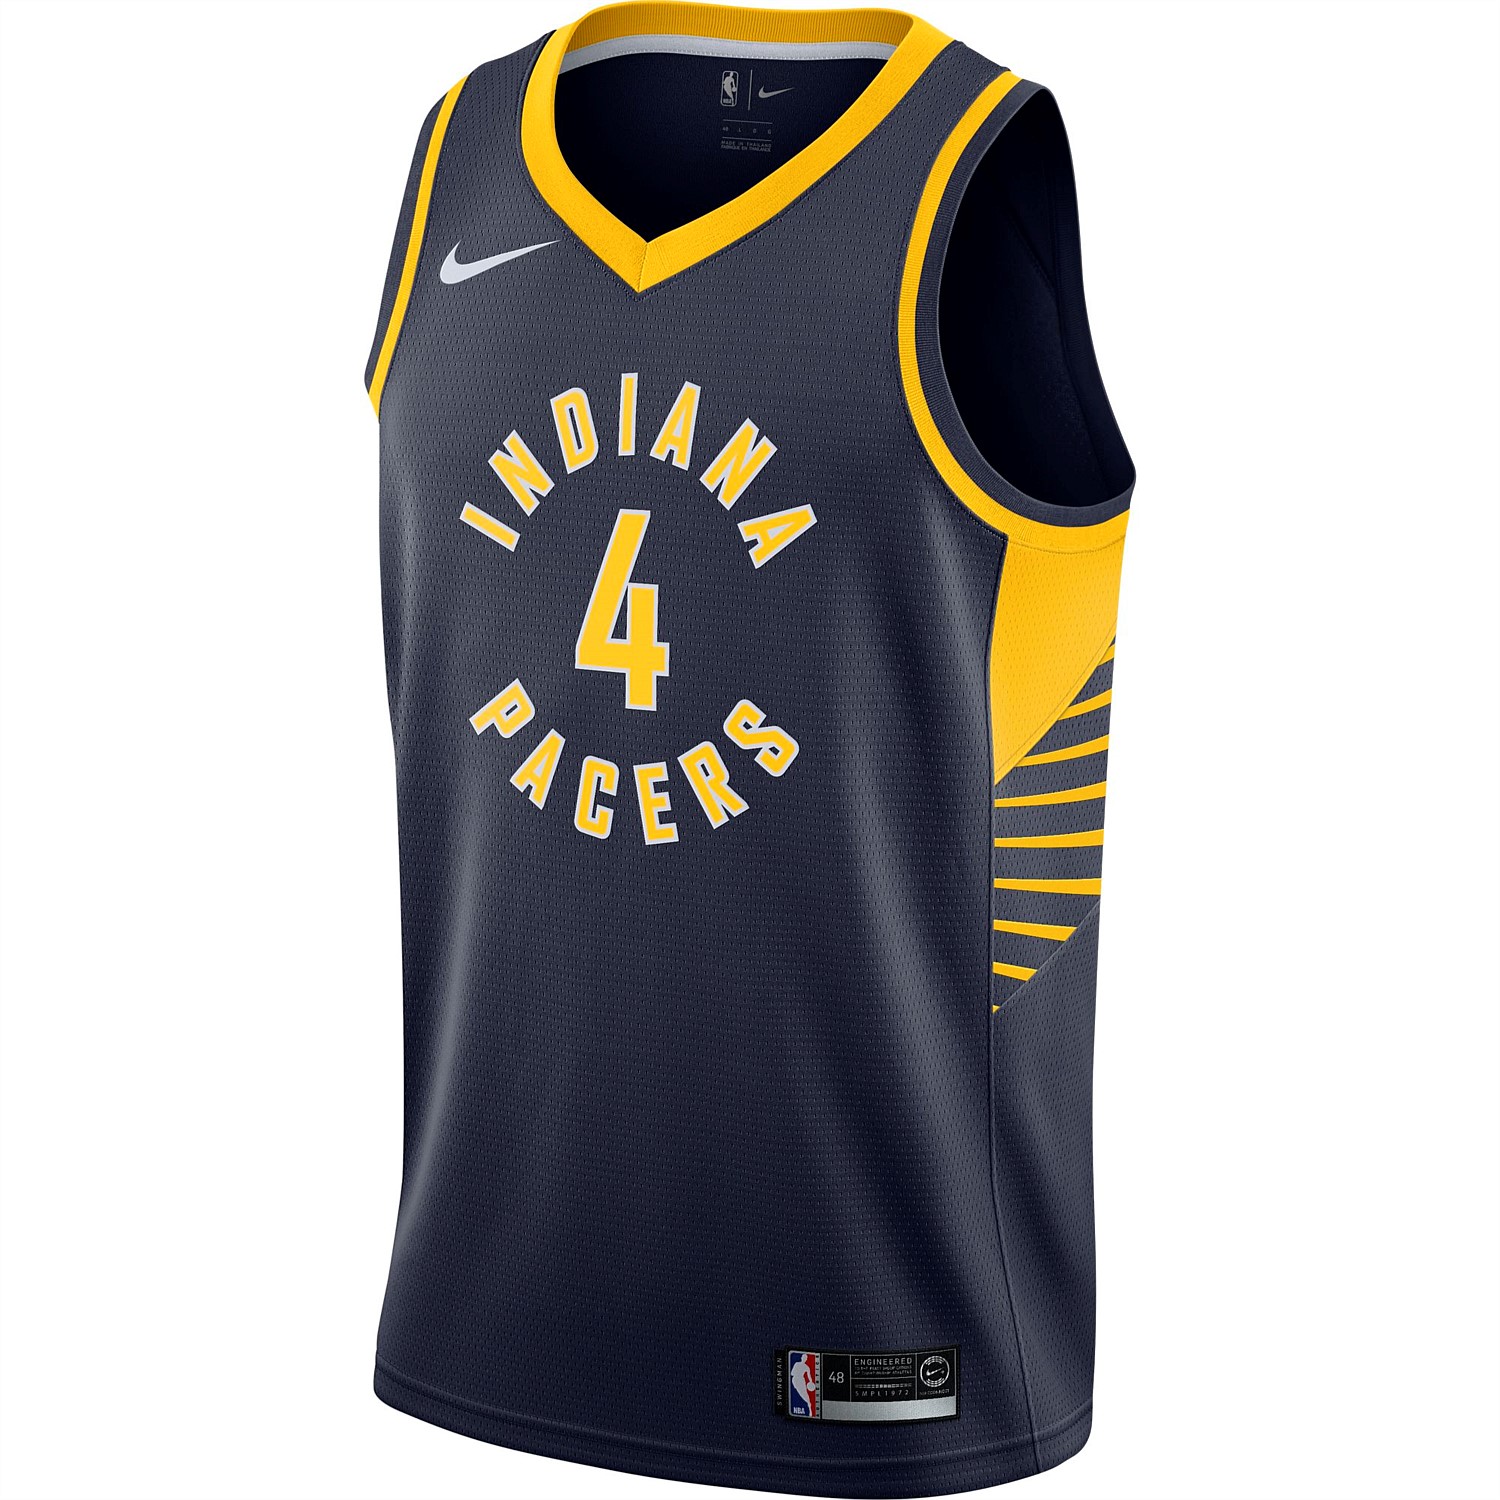 Indiana Pacers NBA Jersey - Oladipo